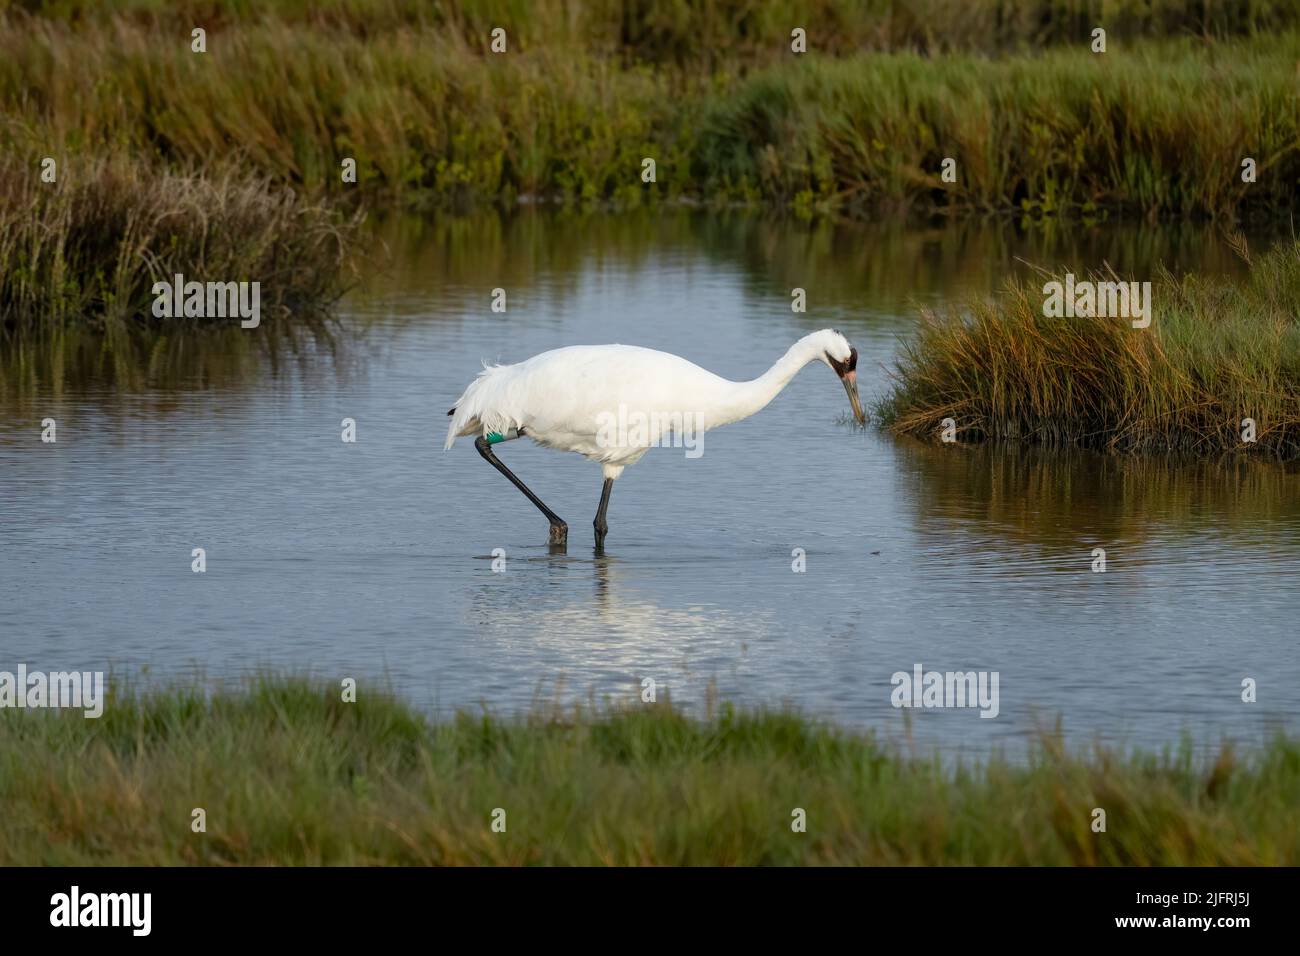 An adult Whooping Crane, Grus americana, hunting for crabs in a saltwater marsh in the Aransas National Wildlife Refuge in Texas. Stock Photo